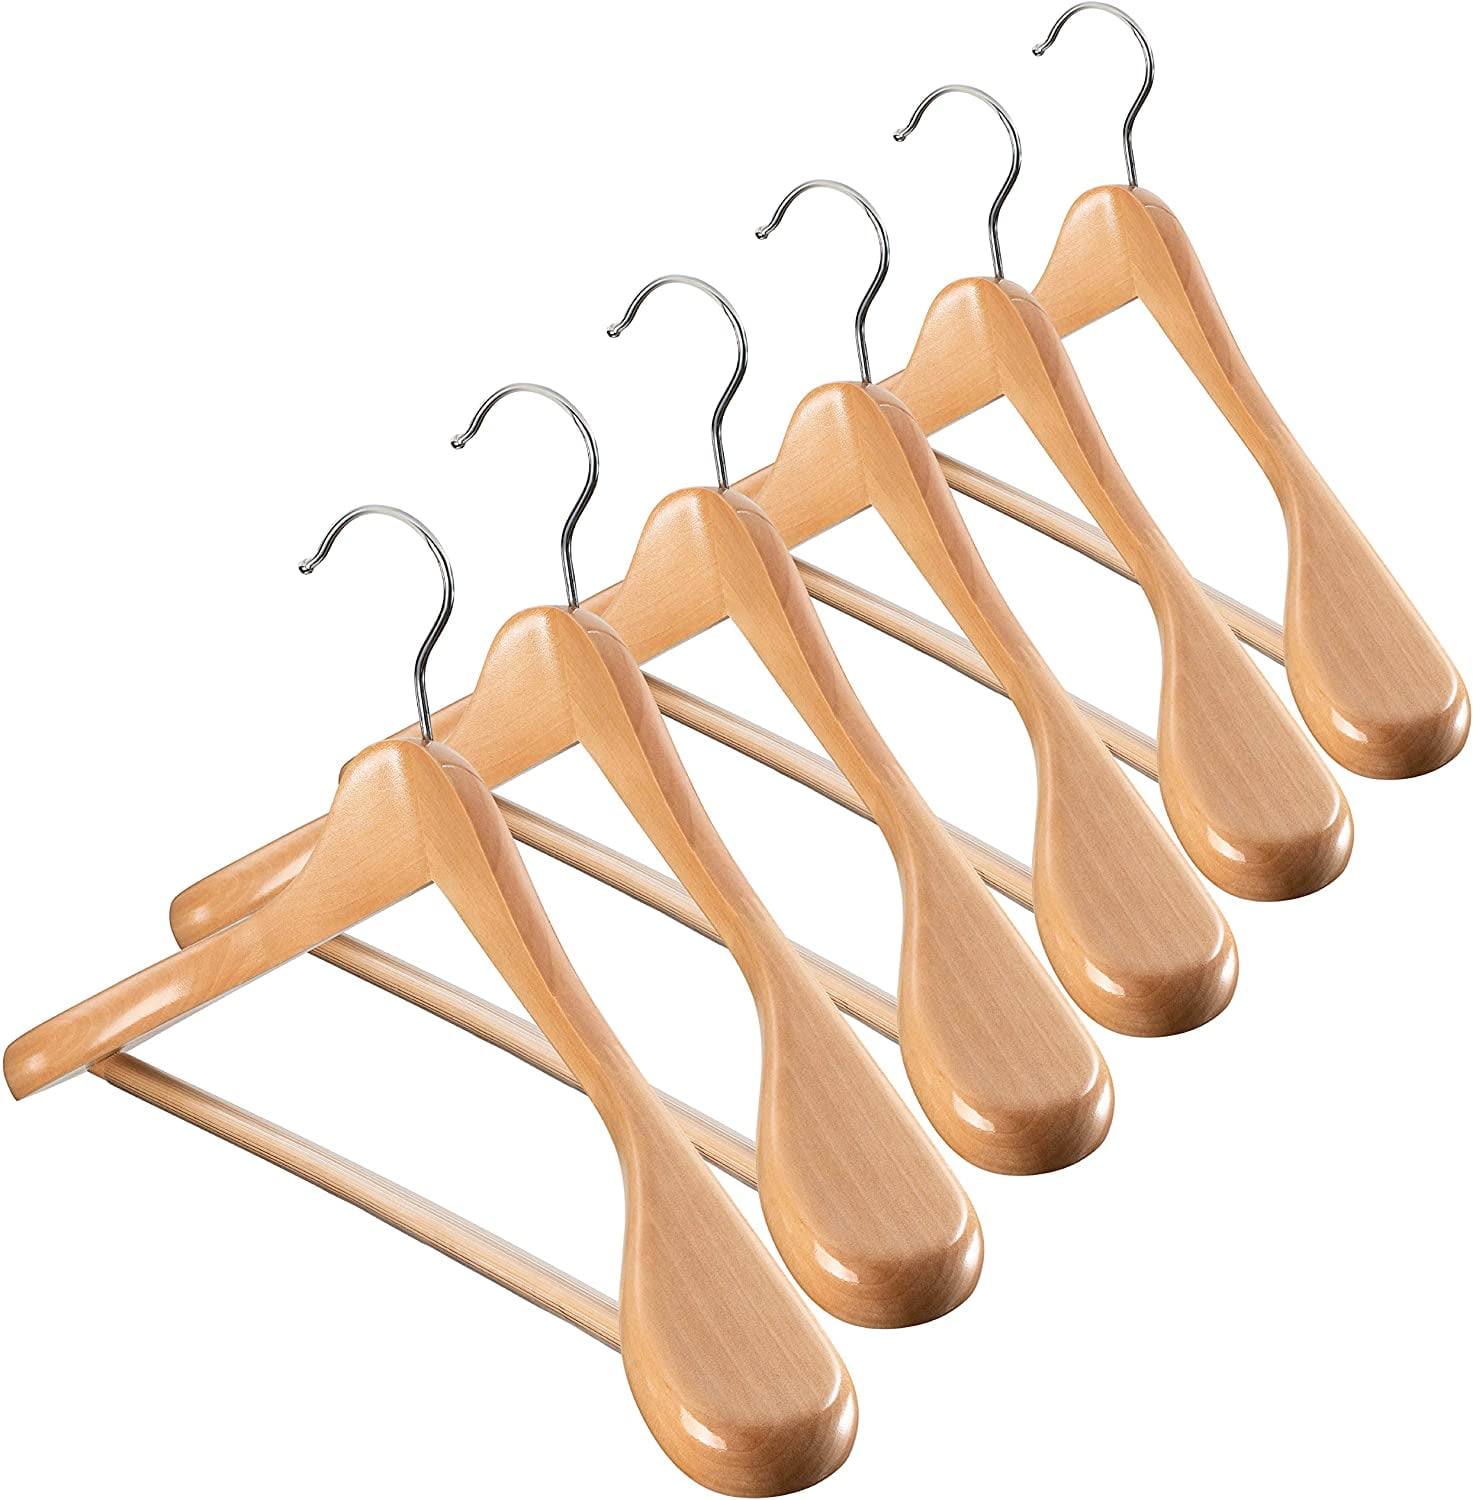  Extra Large Wooden Suit Hanger with Velvet Non-Slip Bar and  Natural Finish, Box of 50 Oversized 20 Inch Hangers with Notches and Chrome  Swivel Hook by The Great American Hanger Company 